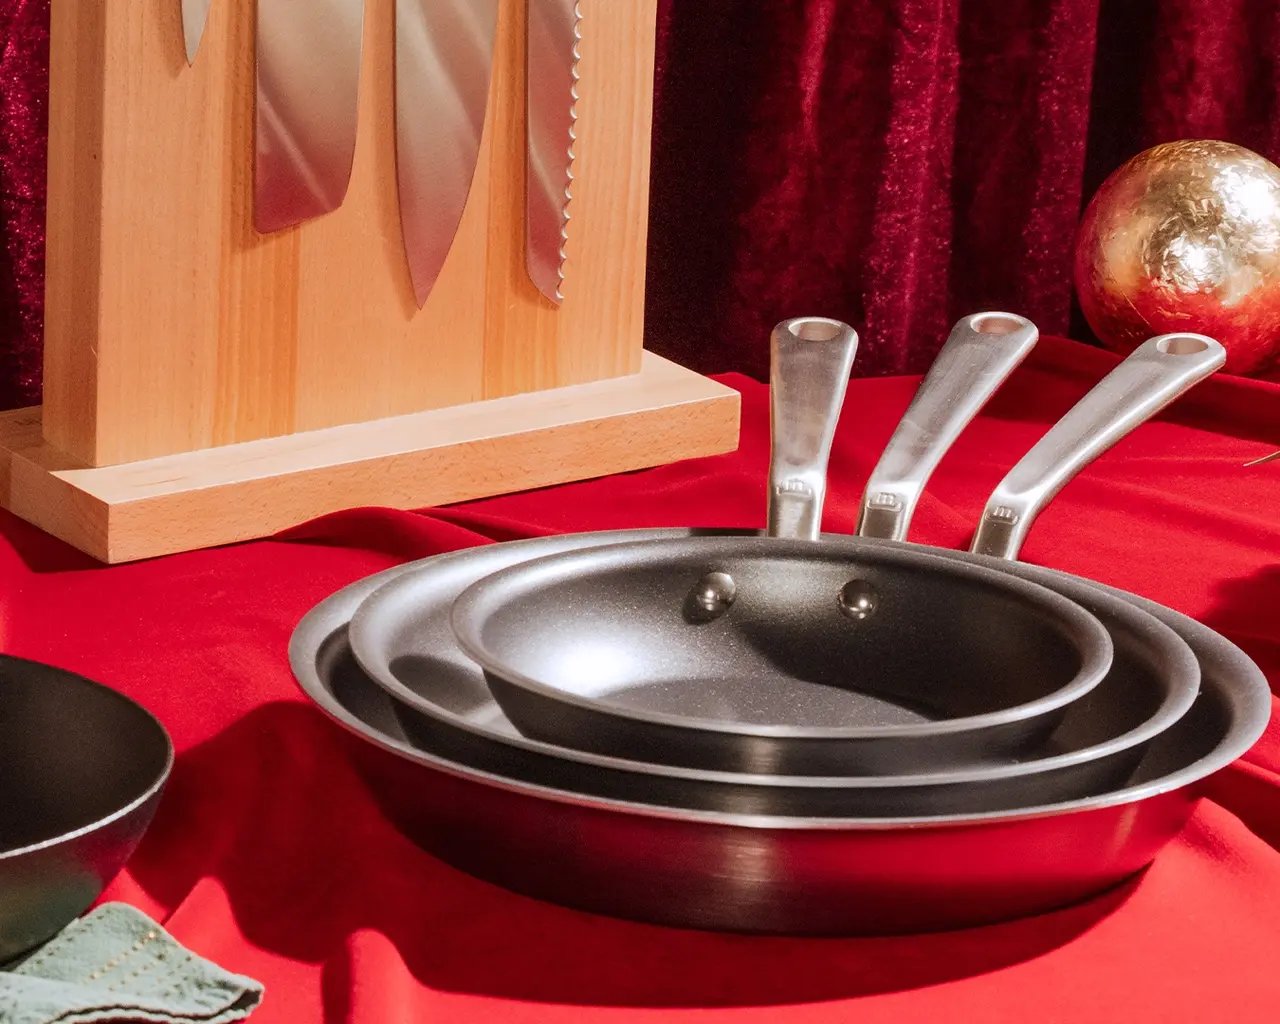 A set of three frying pans with white handles presented on a red cloth, with a wooden frame and a gold object in the background.